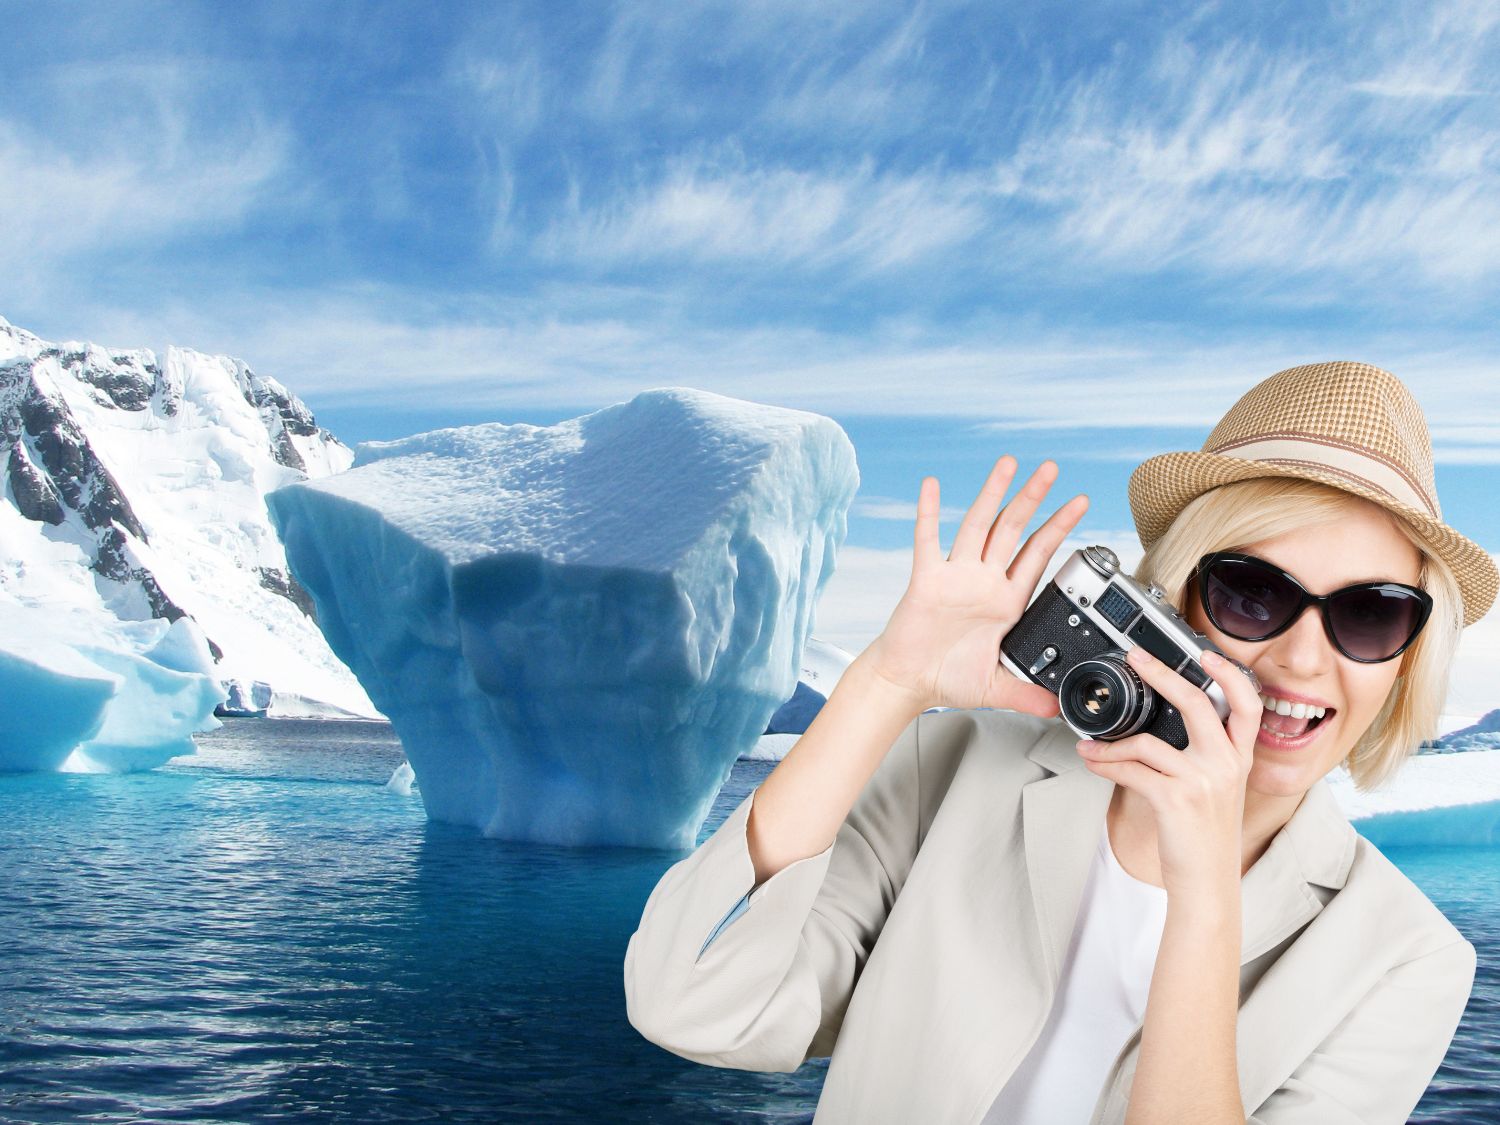 The 6 Best Antarctica Tours For Unforgettable Adventures That Are Achievable & Affordable!